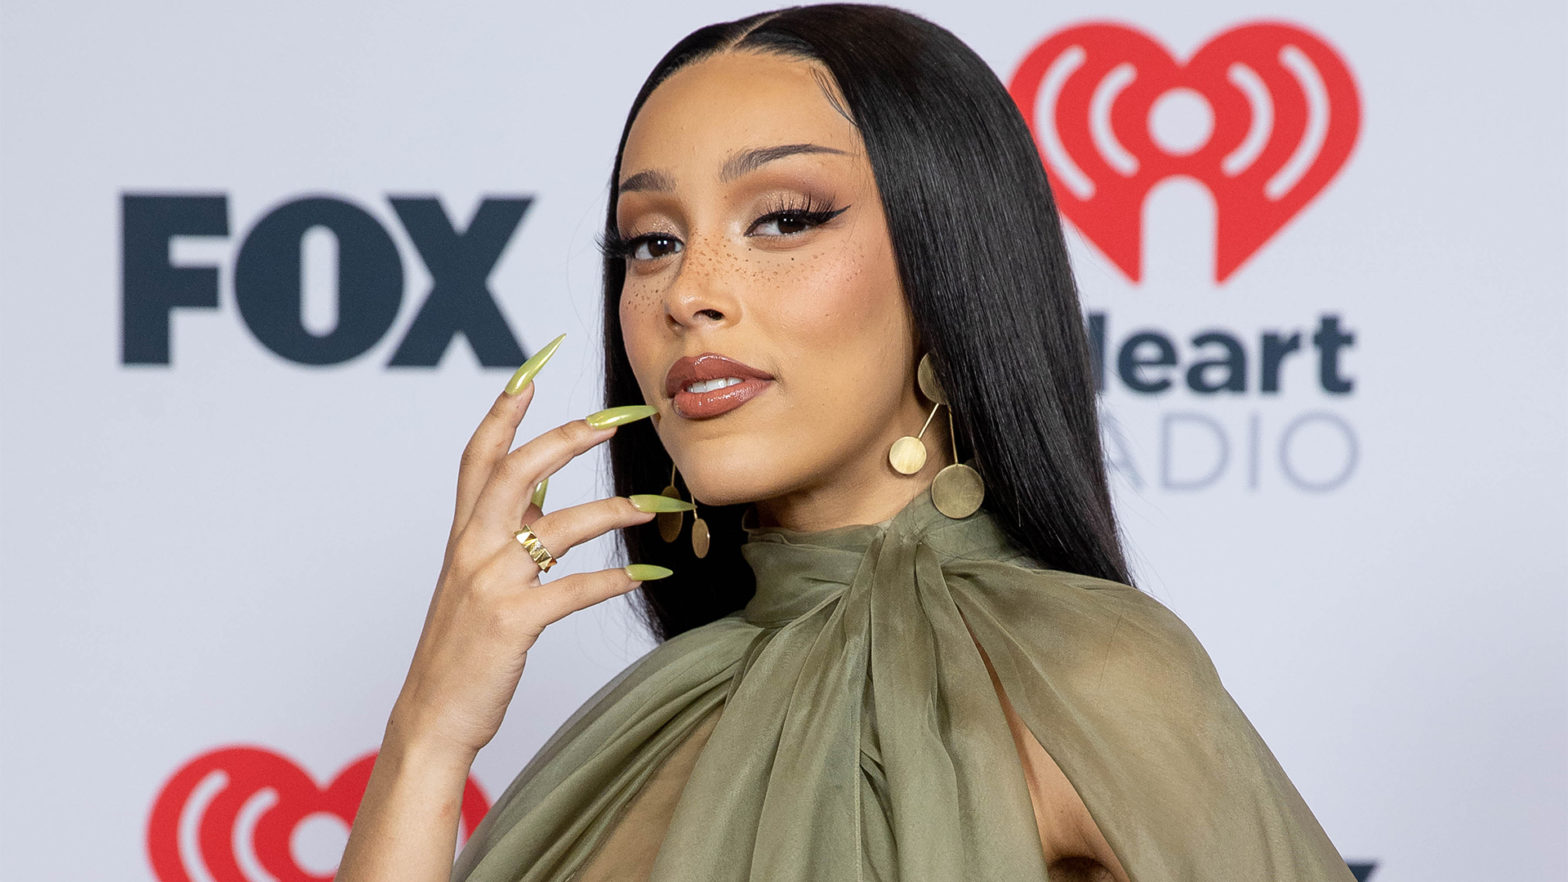 Doja Cat Trademarks And Readies New Brand 'It's Giving,' But Should She Credit The Black Influencer That Helped Popularize The Phrase?